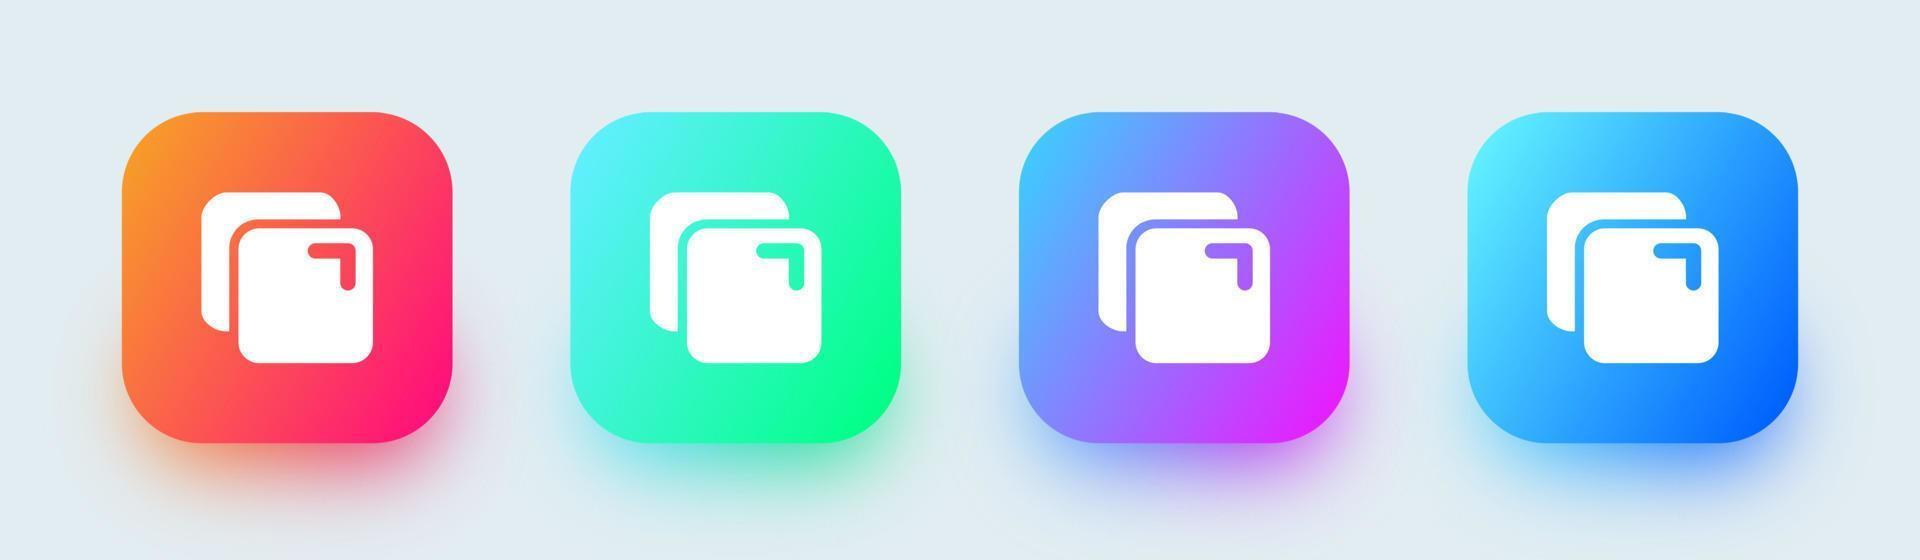 Copy solid icon in square gradient colors. Duplicate signs vector illustration.